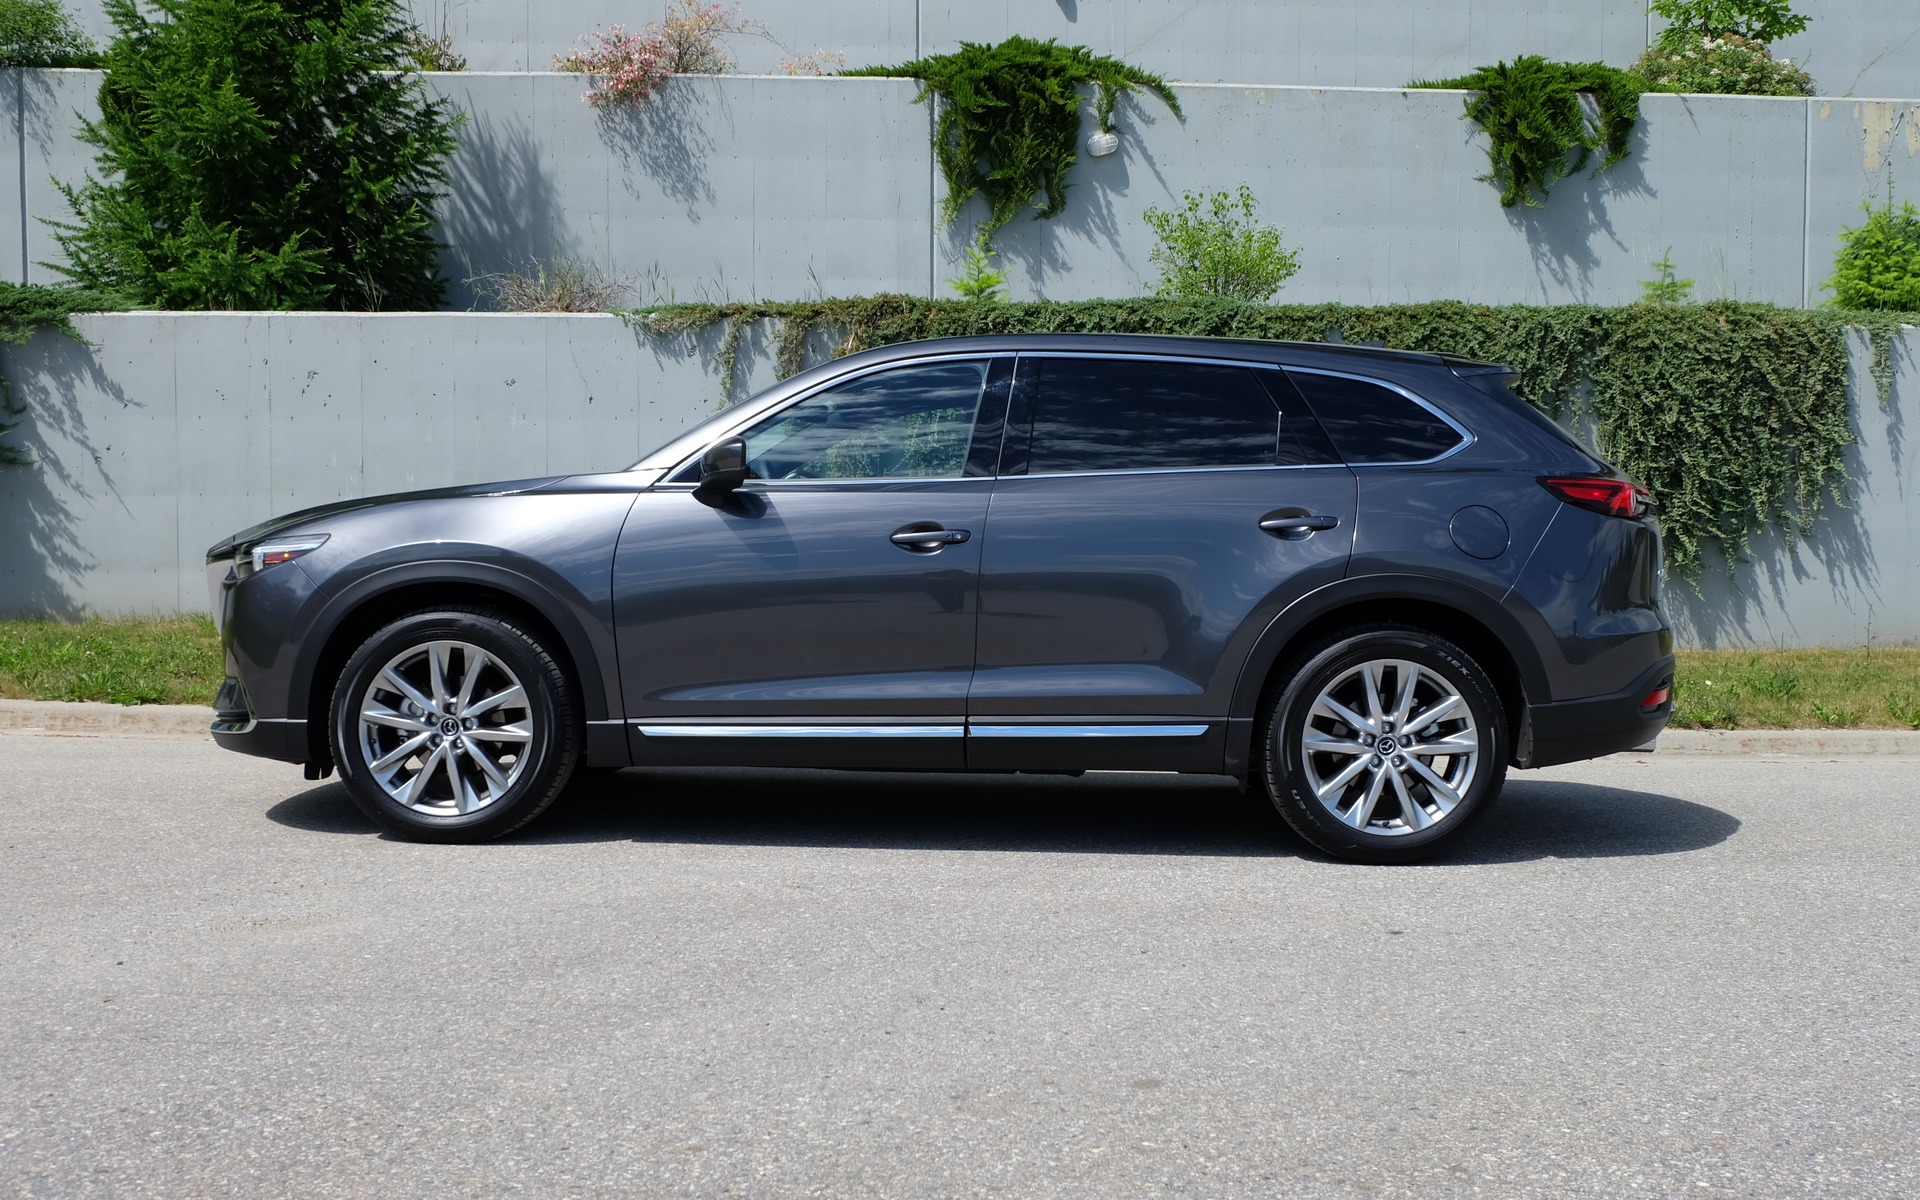 The 2016 Mazda Cx 9 Redesigned To Be A Winner 527